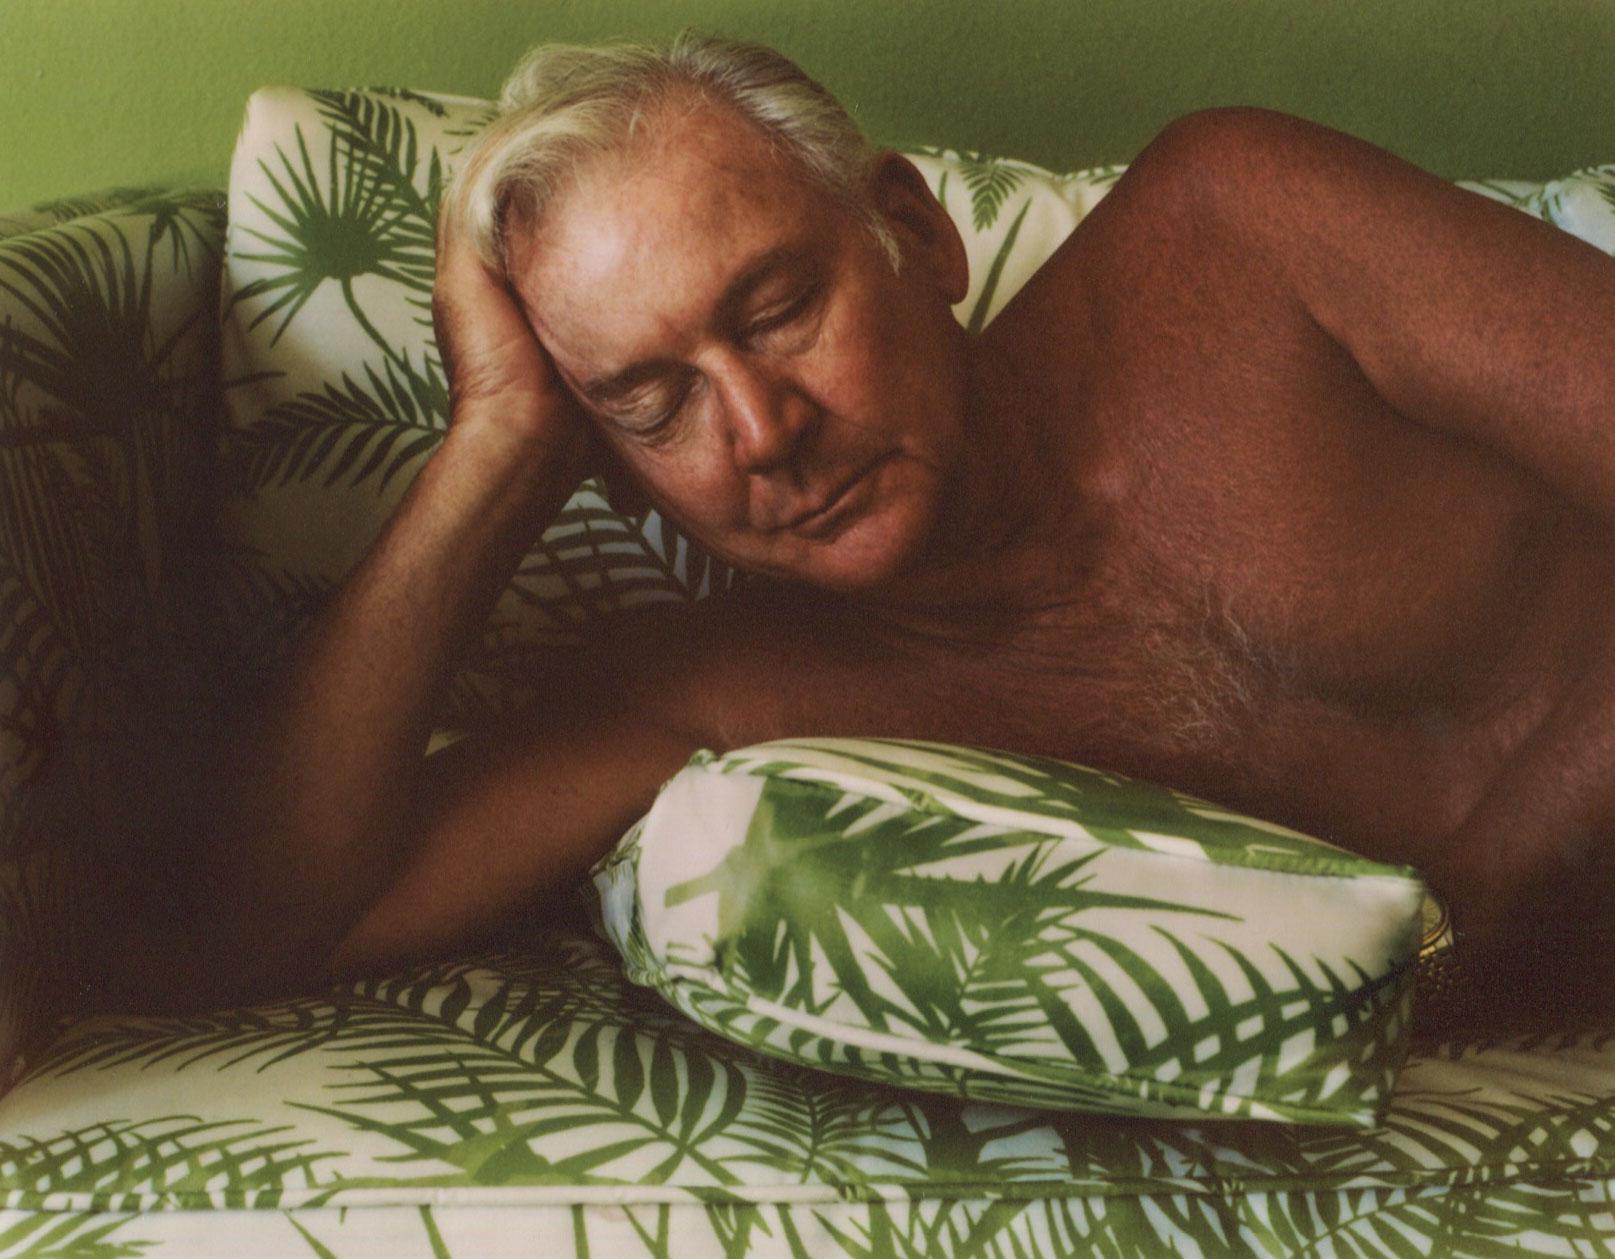 Dad on Sofa (From the series “Pictures from Home”) - Photograph by Larry Sultan